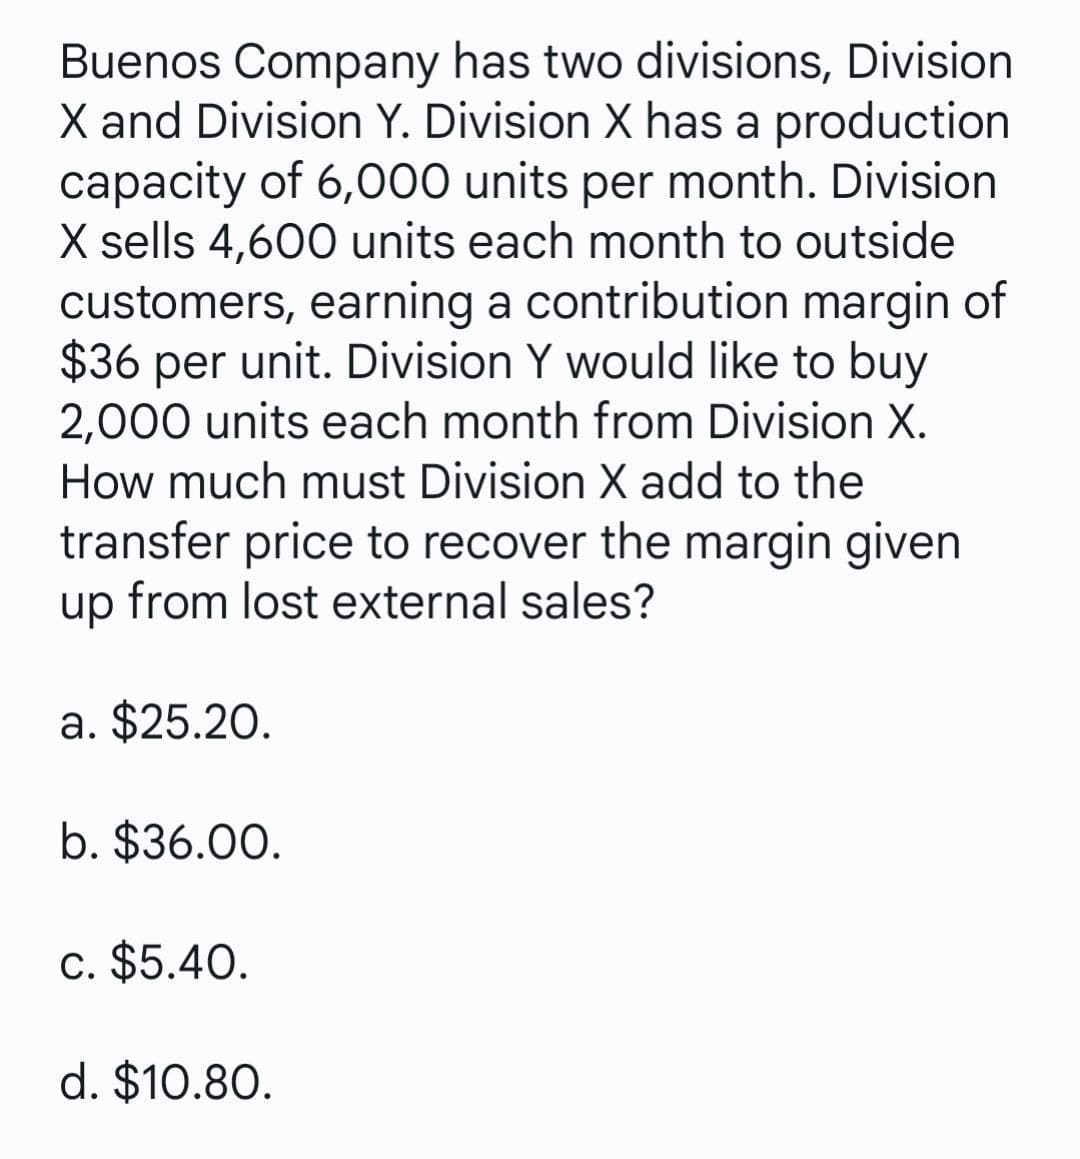 Buenos Company has two divisions, Division
X and Division Y. Division X has a production
capacity of 6,000 units per month. Division
X sells 4,600 units each month to outside
customers, earning a contribution margin of
$36 per unit. Division Y would like to buy
2,000 units each month from Division X.
How much must Division X add to the
transfer price to recover the margin given
up from lost external sales?
a. $25.20.
b. $36.00.
c. $5.40.
d. $10.80.
